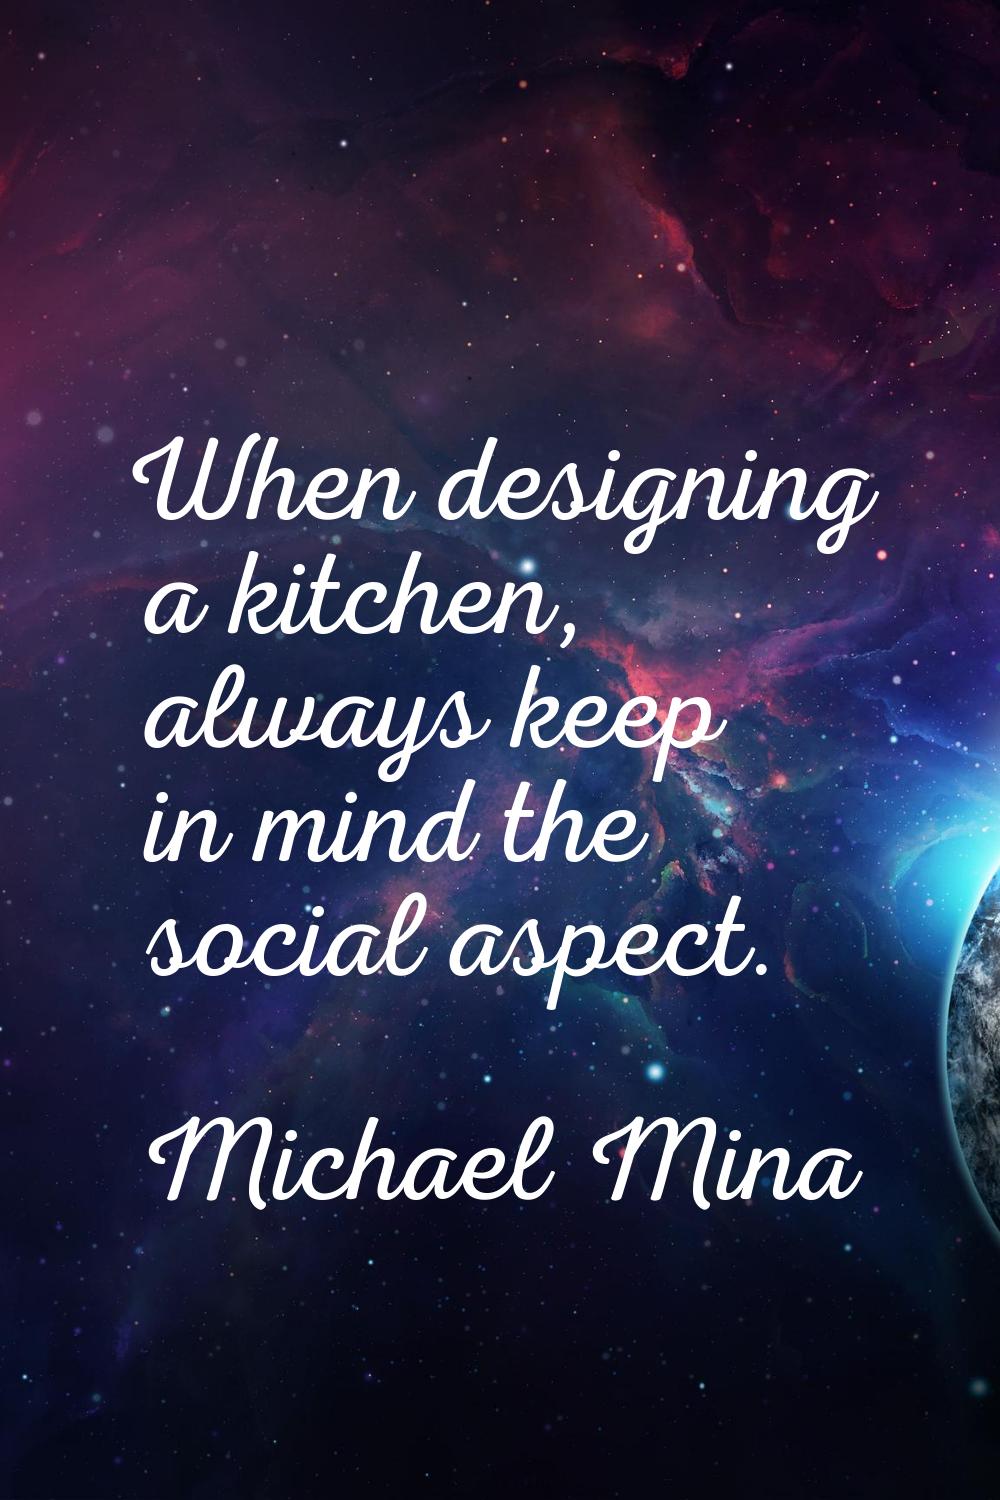 When designing a kitchen, always keep in mind the social aspect.